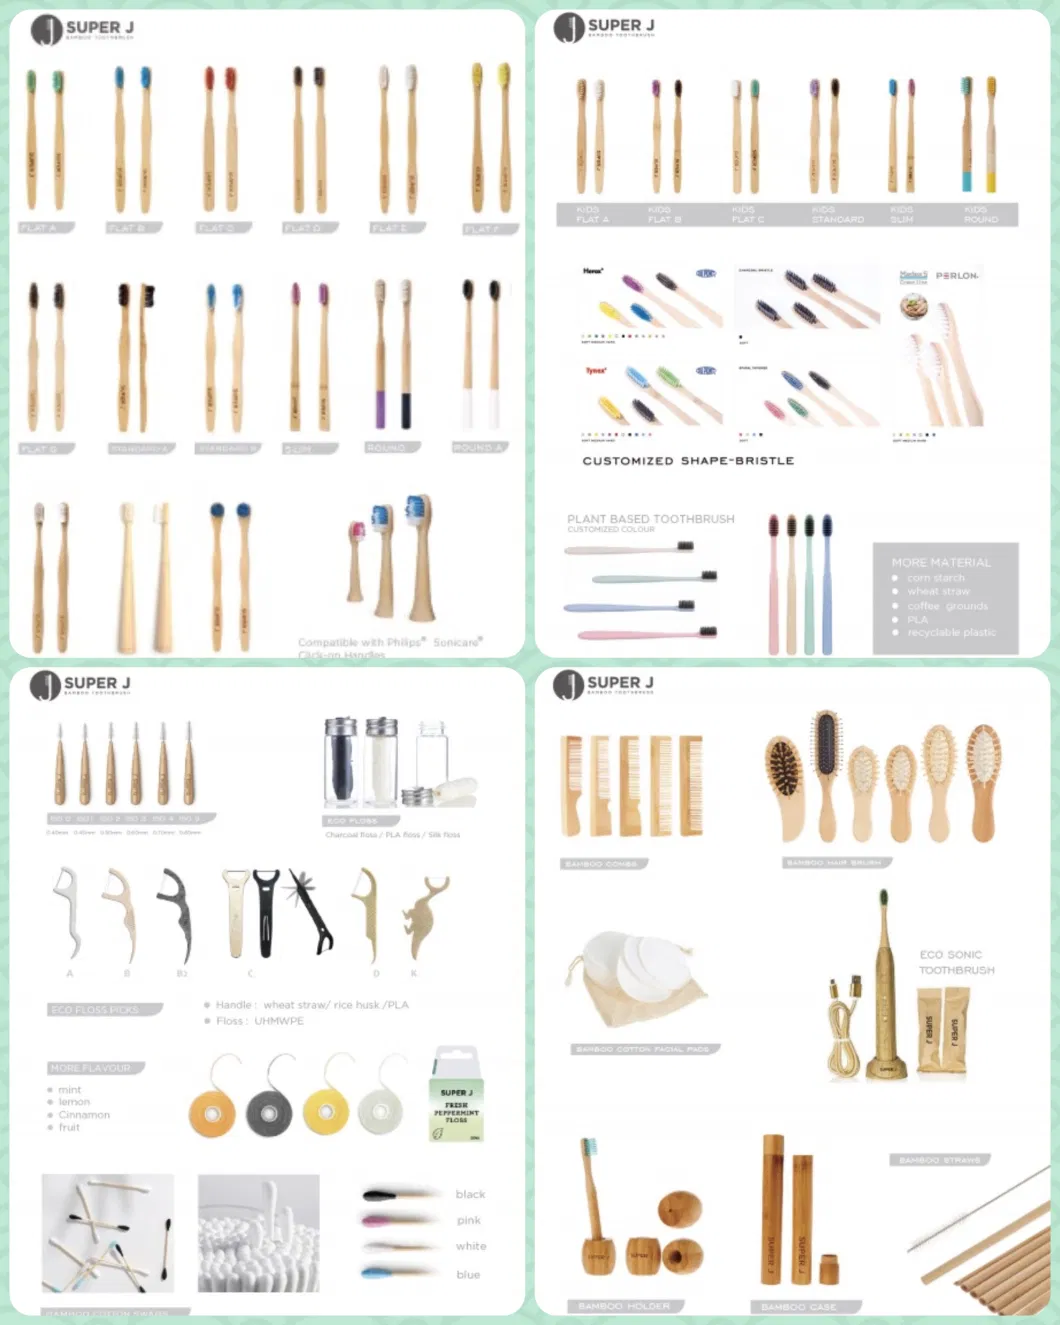 Bamboo Interdental Brush Dental Orthodontic Wood Disposable Strong Cleaning Toothpick Interdental Brush Wood